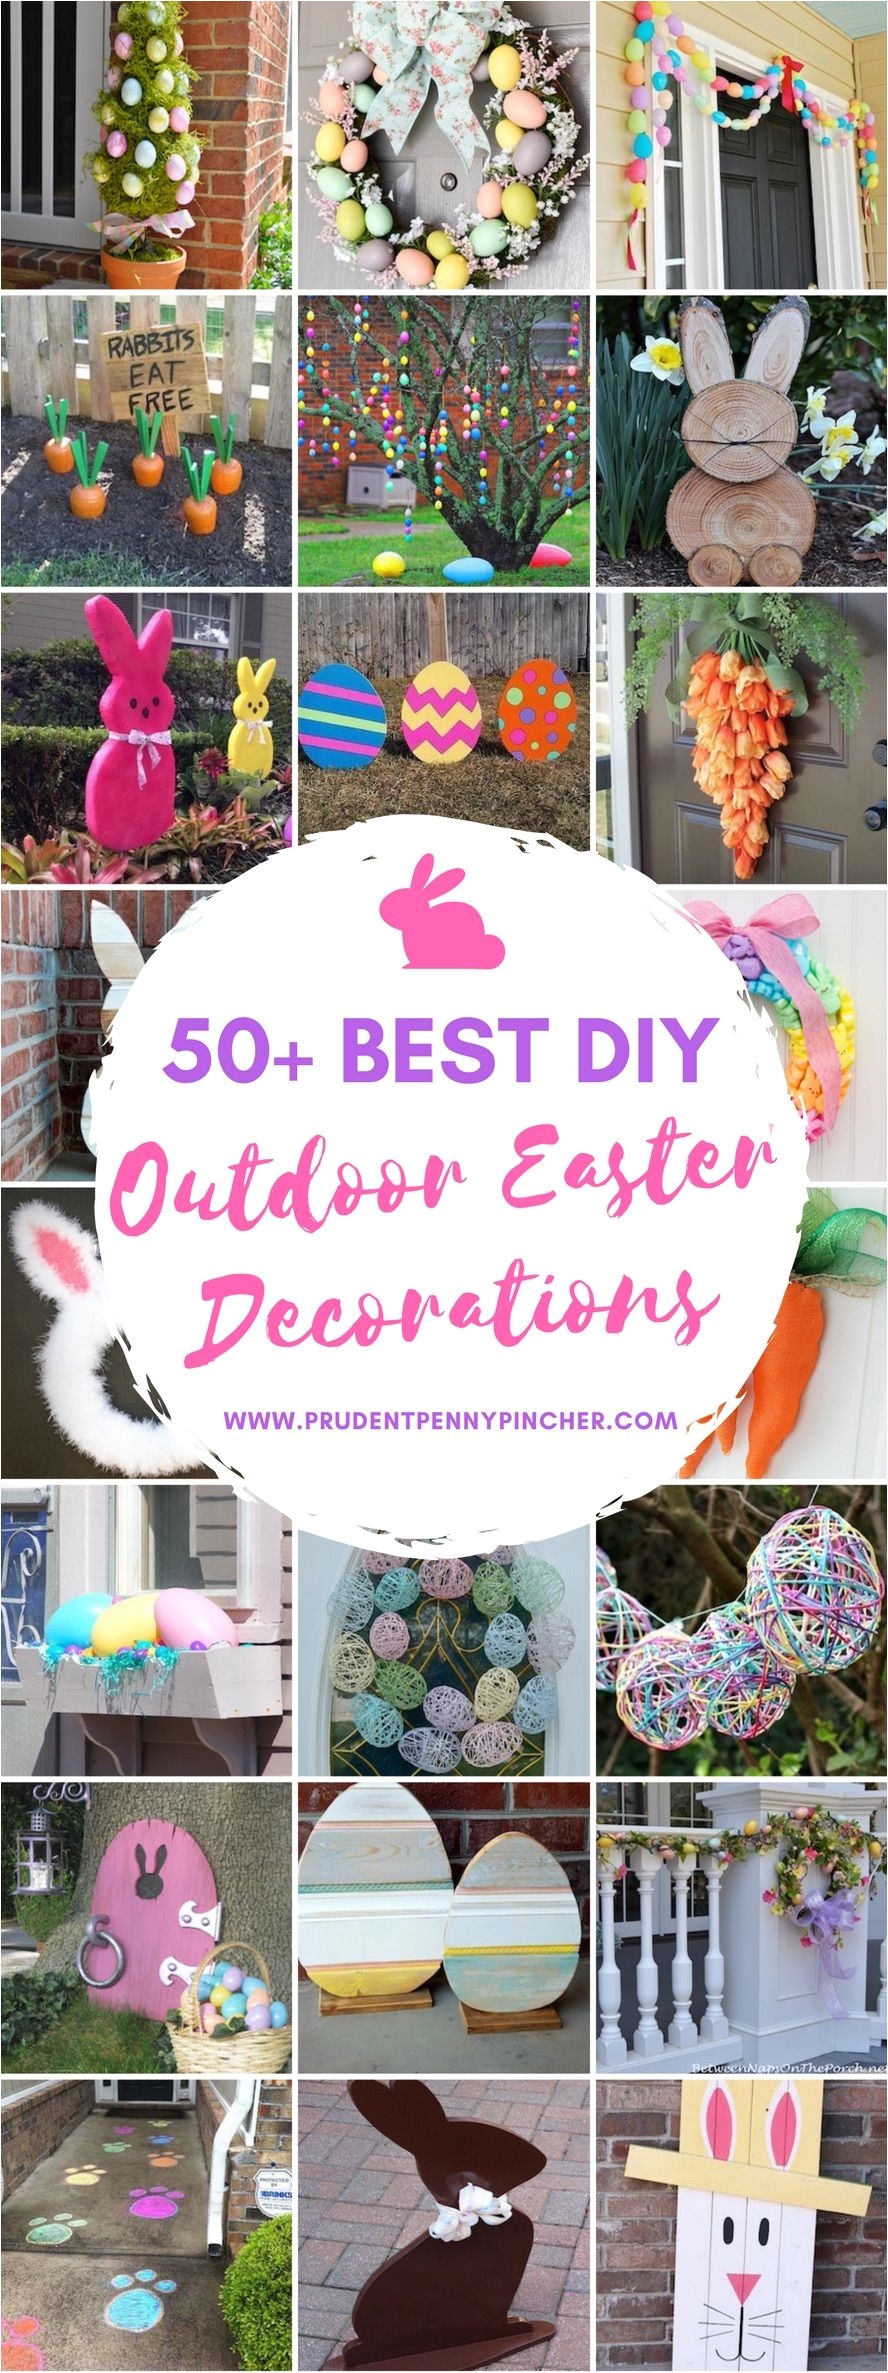 Homemade Easter Decorations for Outside What An Awesome Idea to Decorate the Yard for Easter 973thedawg Com